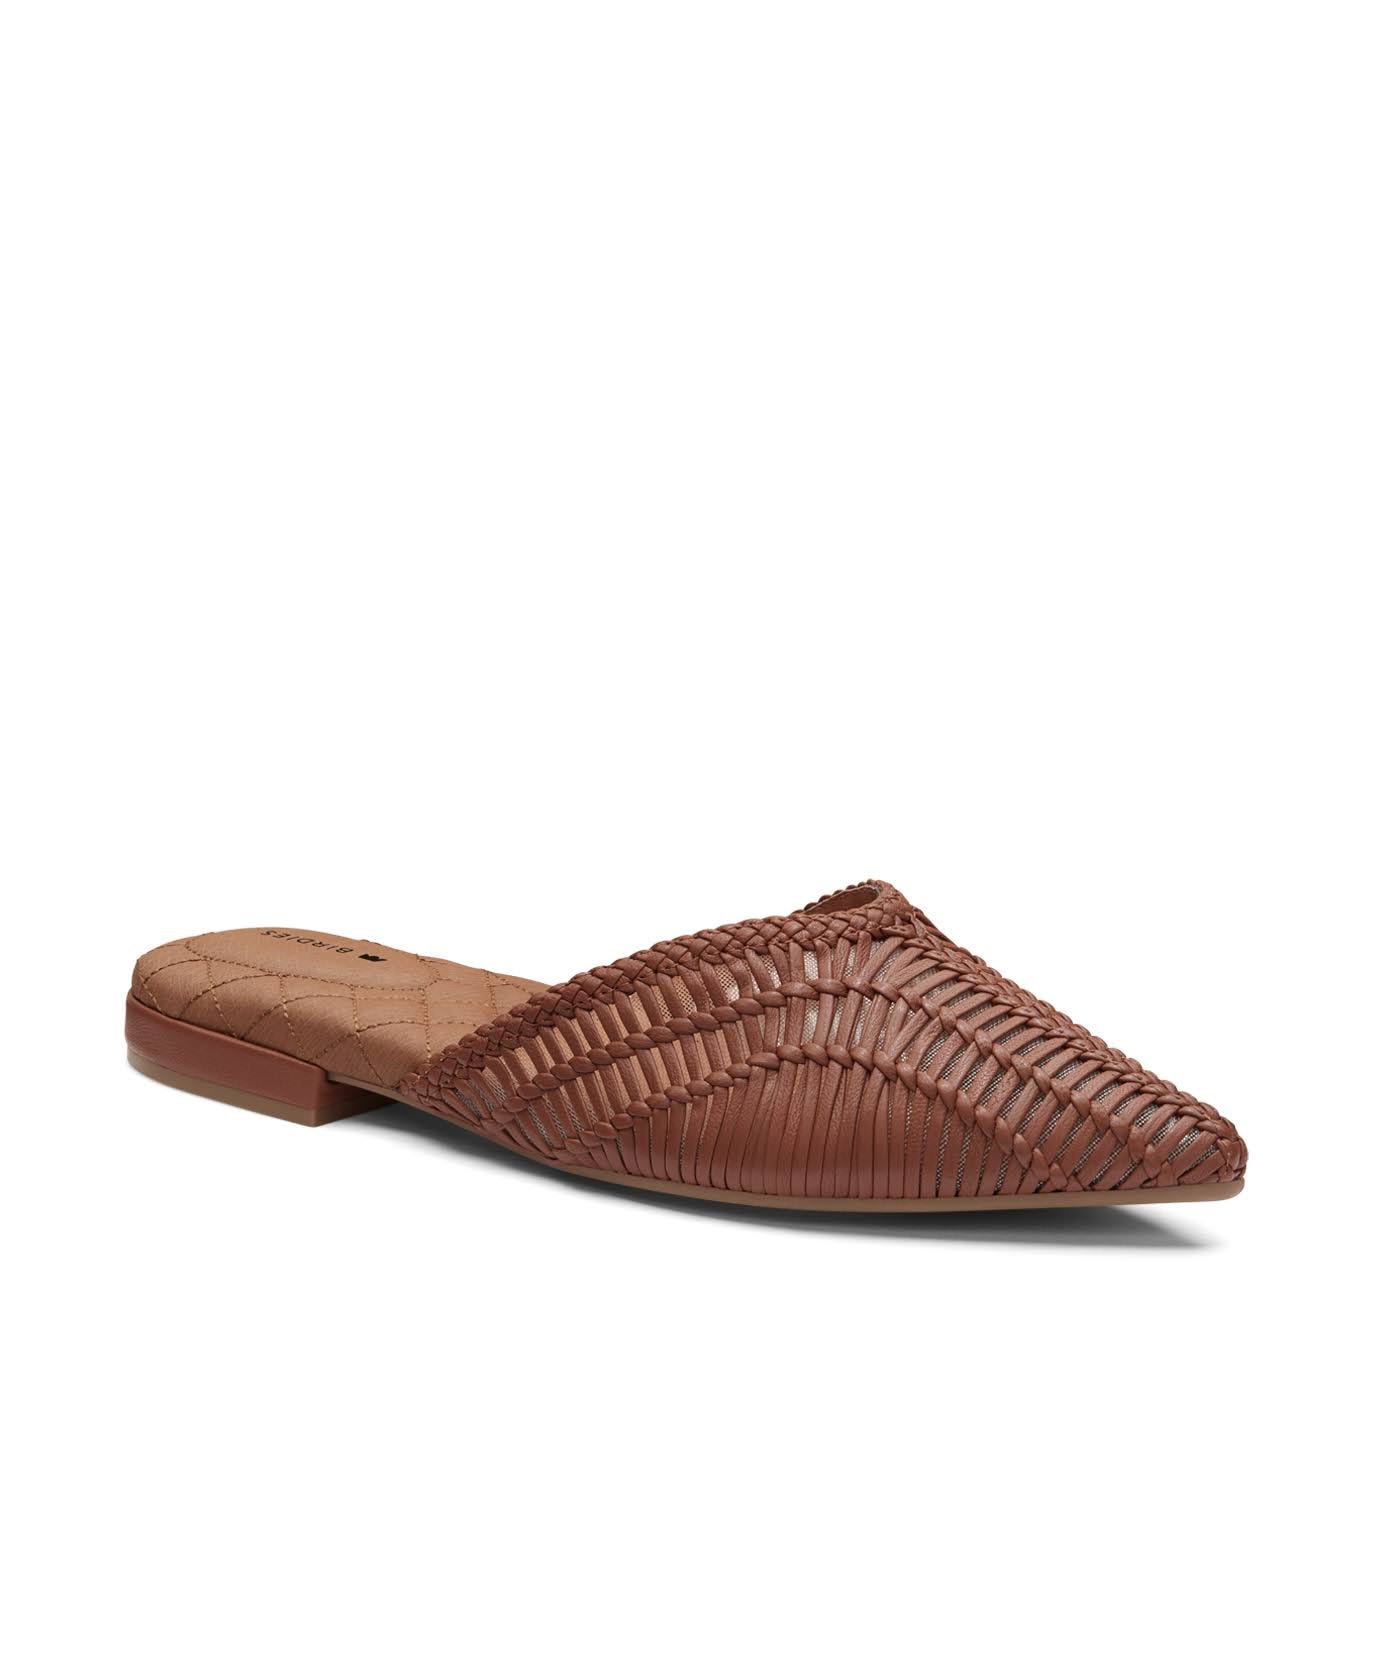 Stylish Brown Woven Leather Mules | Image